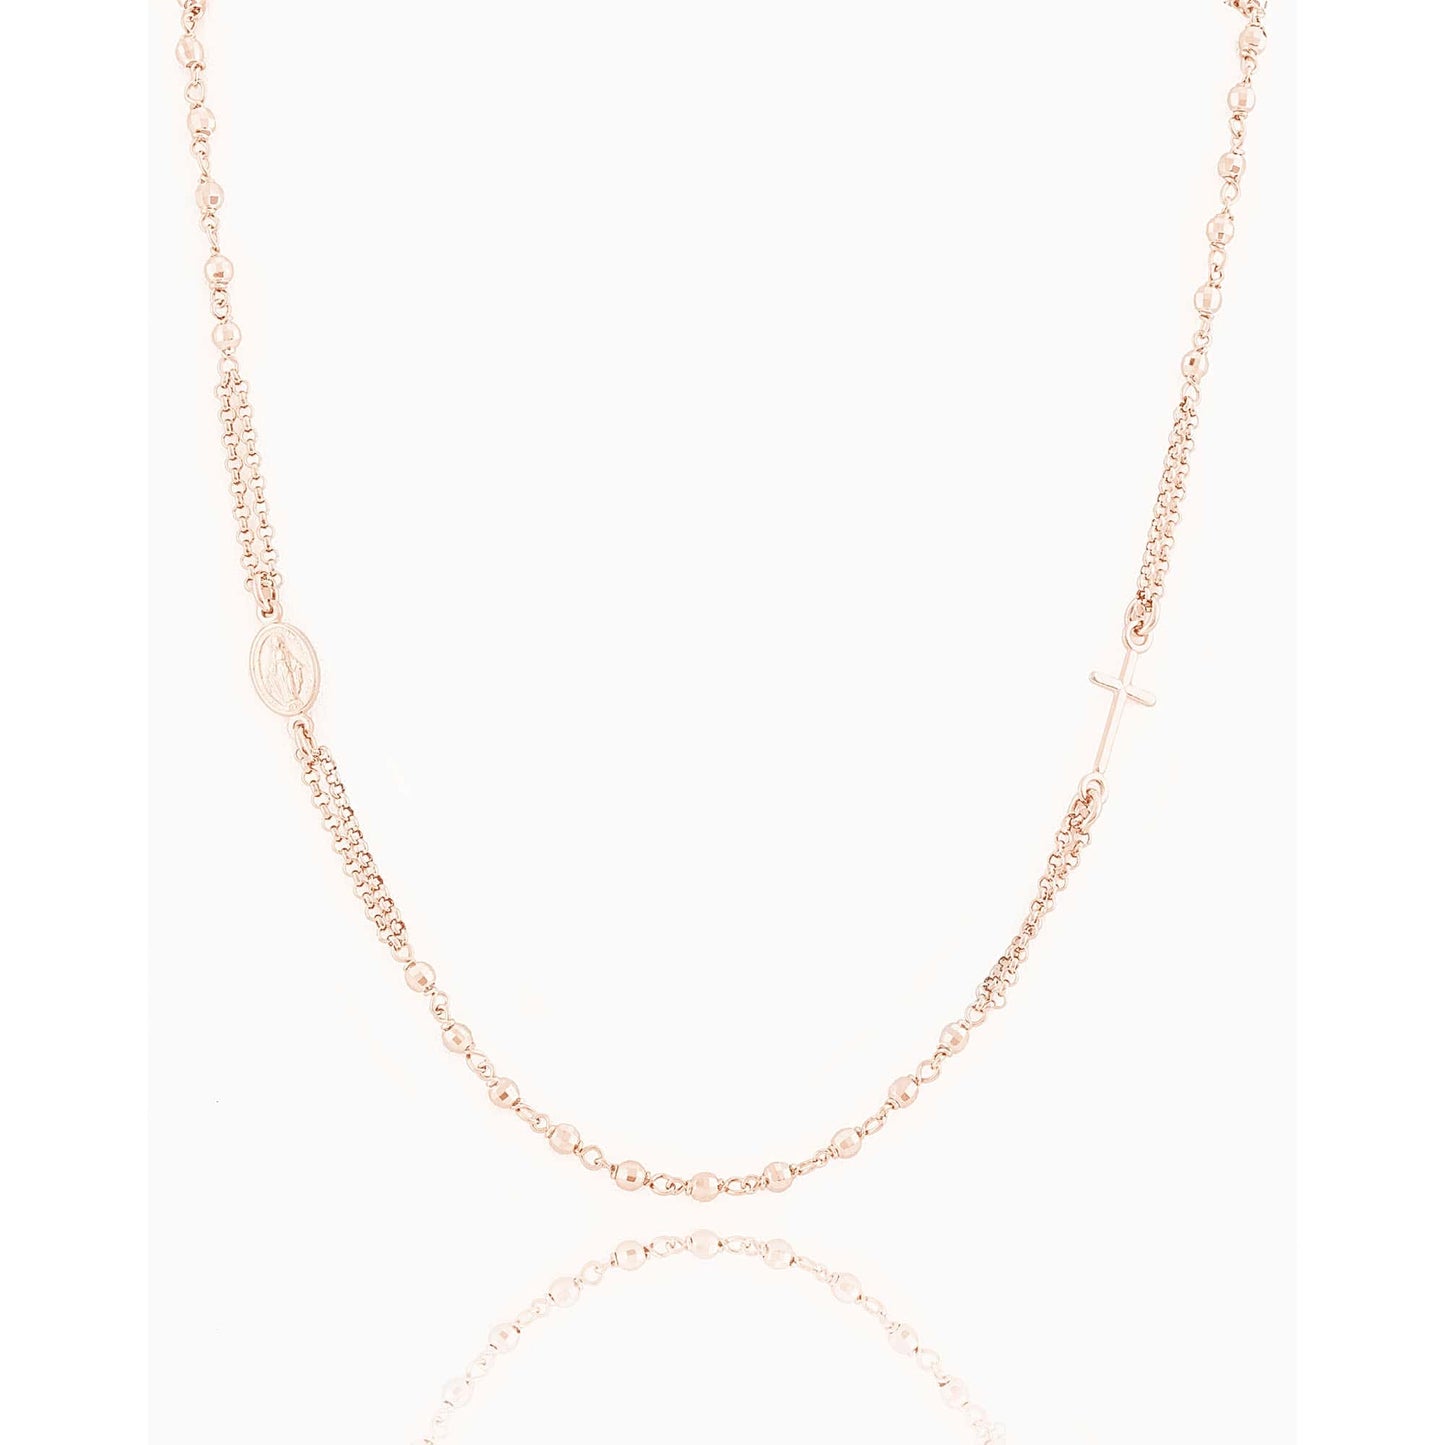 MONDO CATTOLICO Necklaces Rose Gold / Cm 46 (18.1 in) STERLING SILVER PLATED 3 MM BEADS NECKLACE